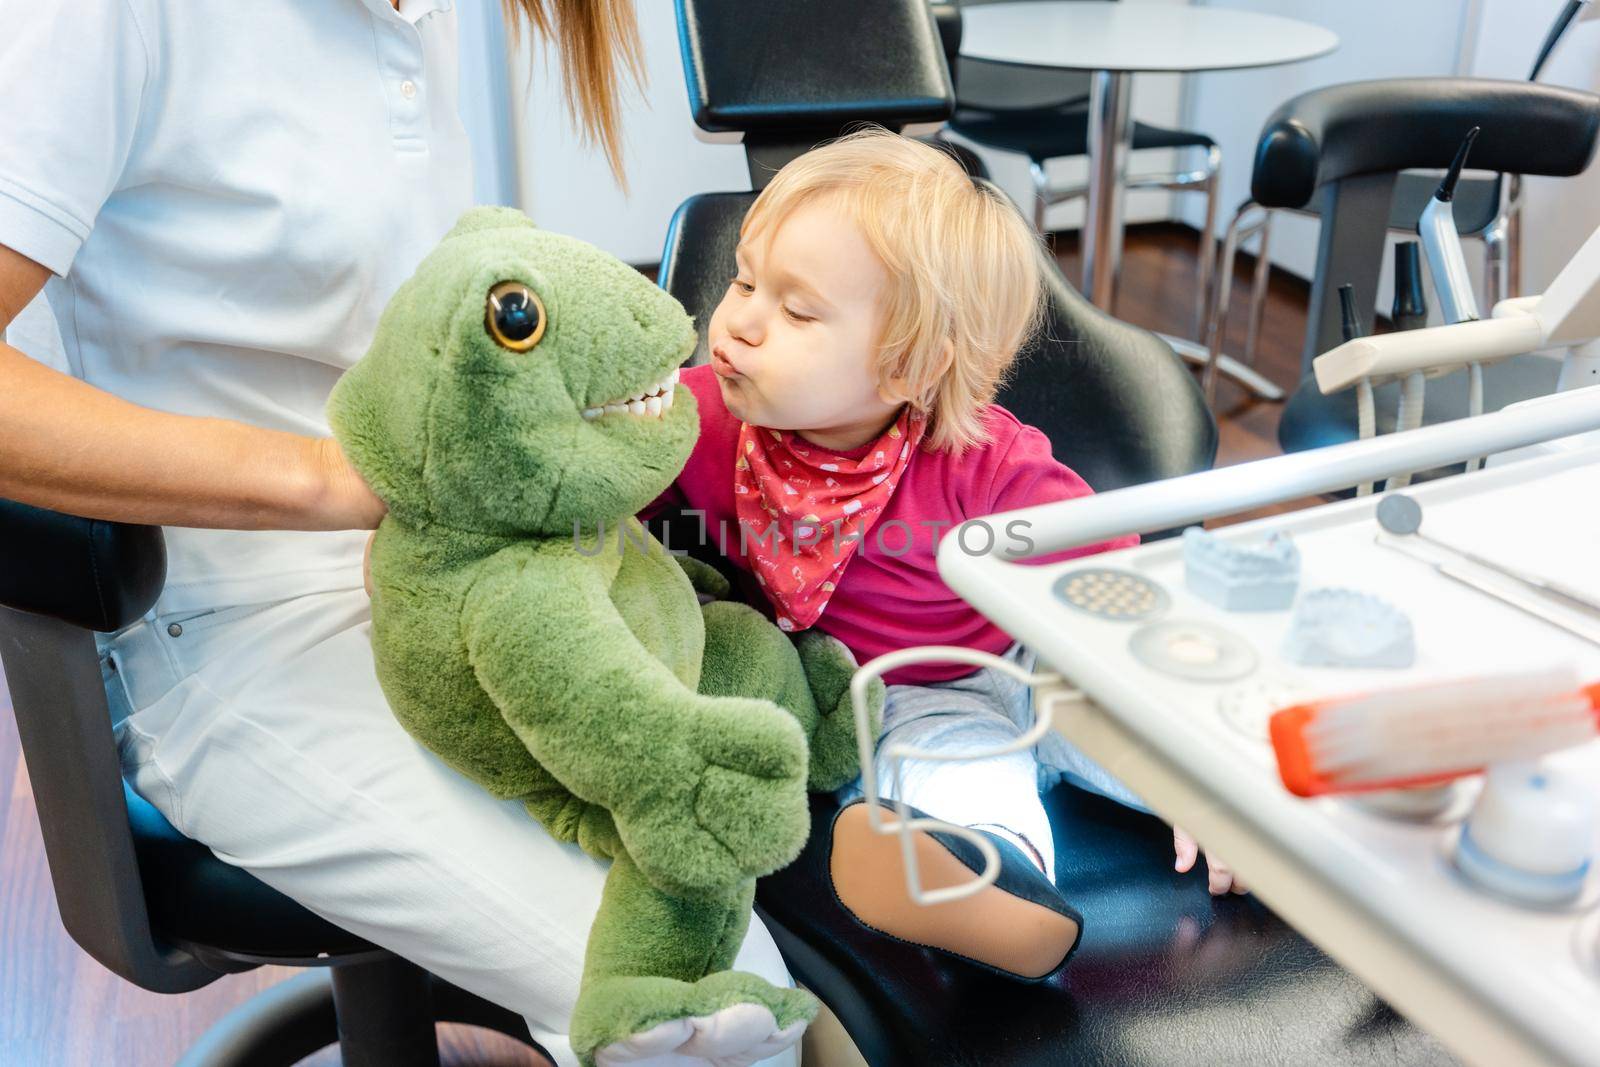 Child at the dentist brushing teeth of a plush toy learning how to do it